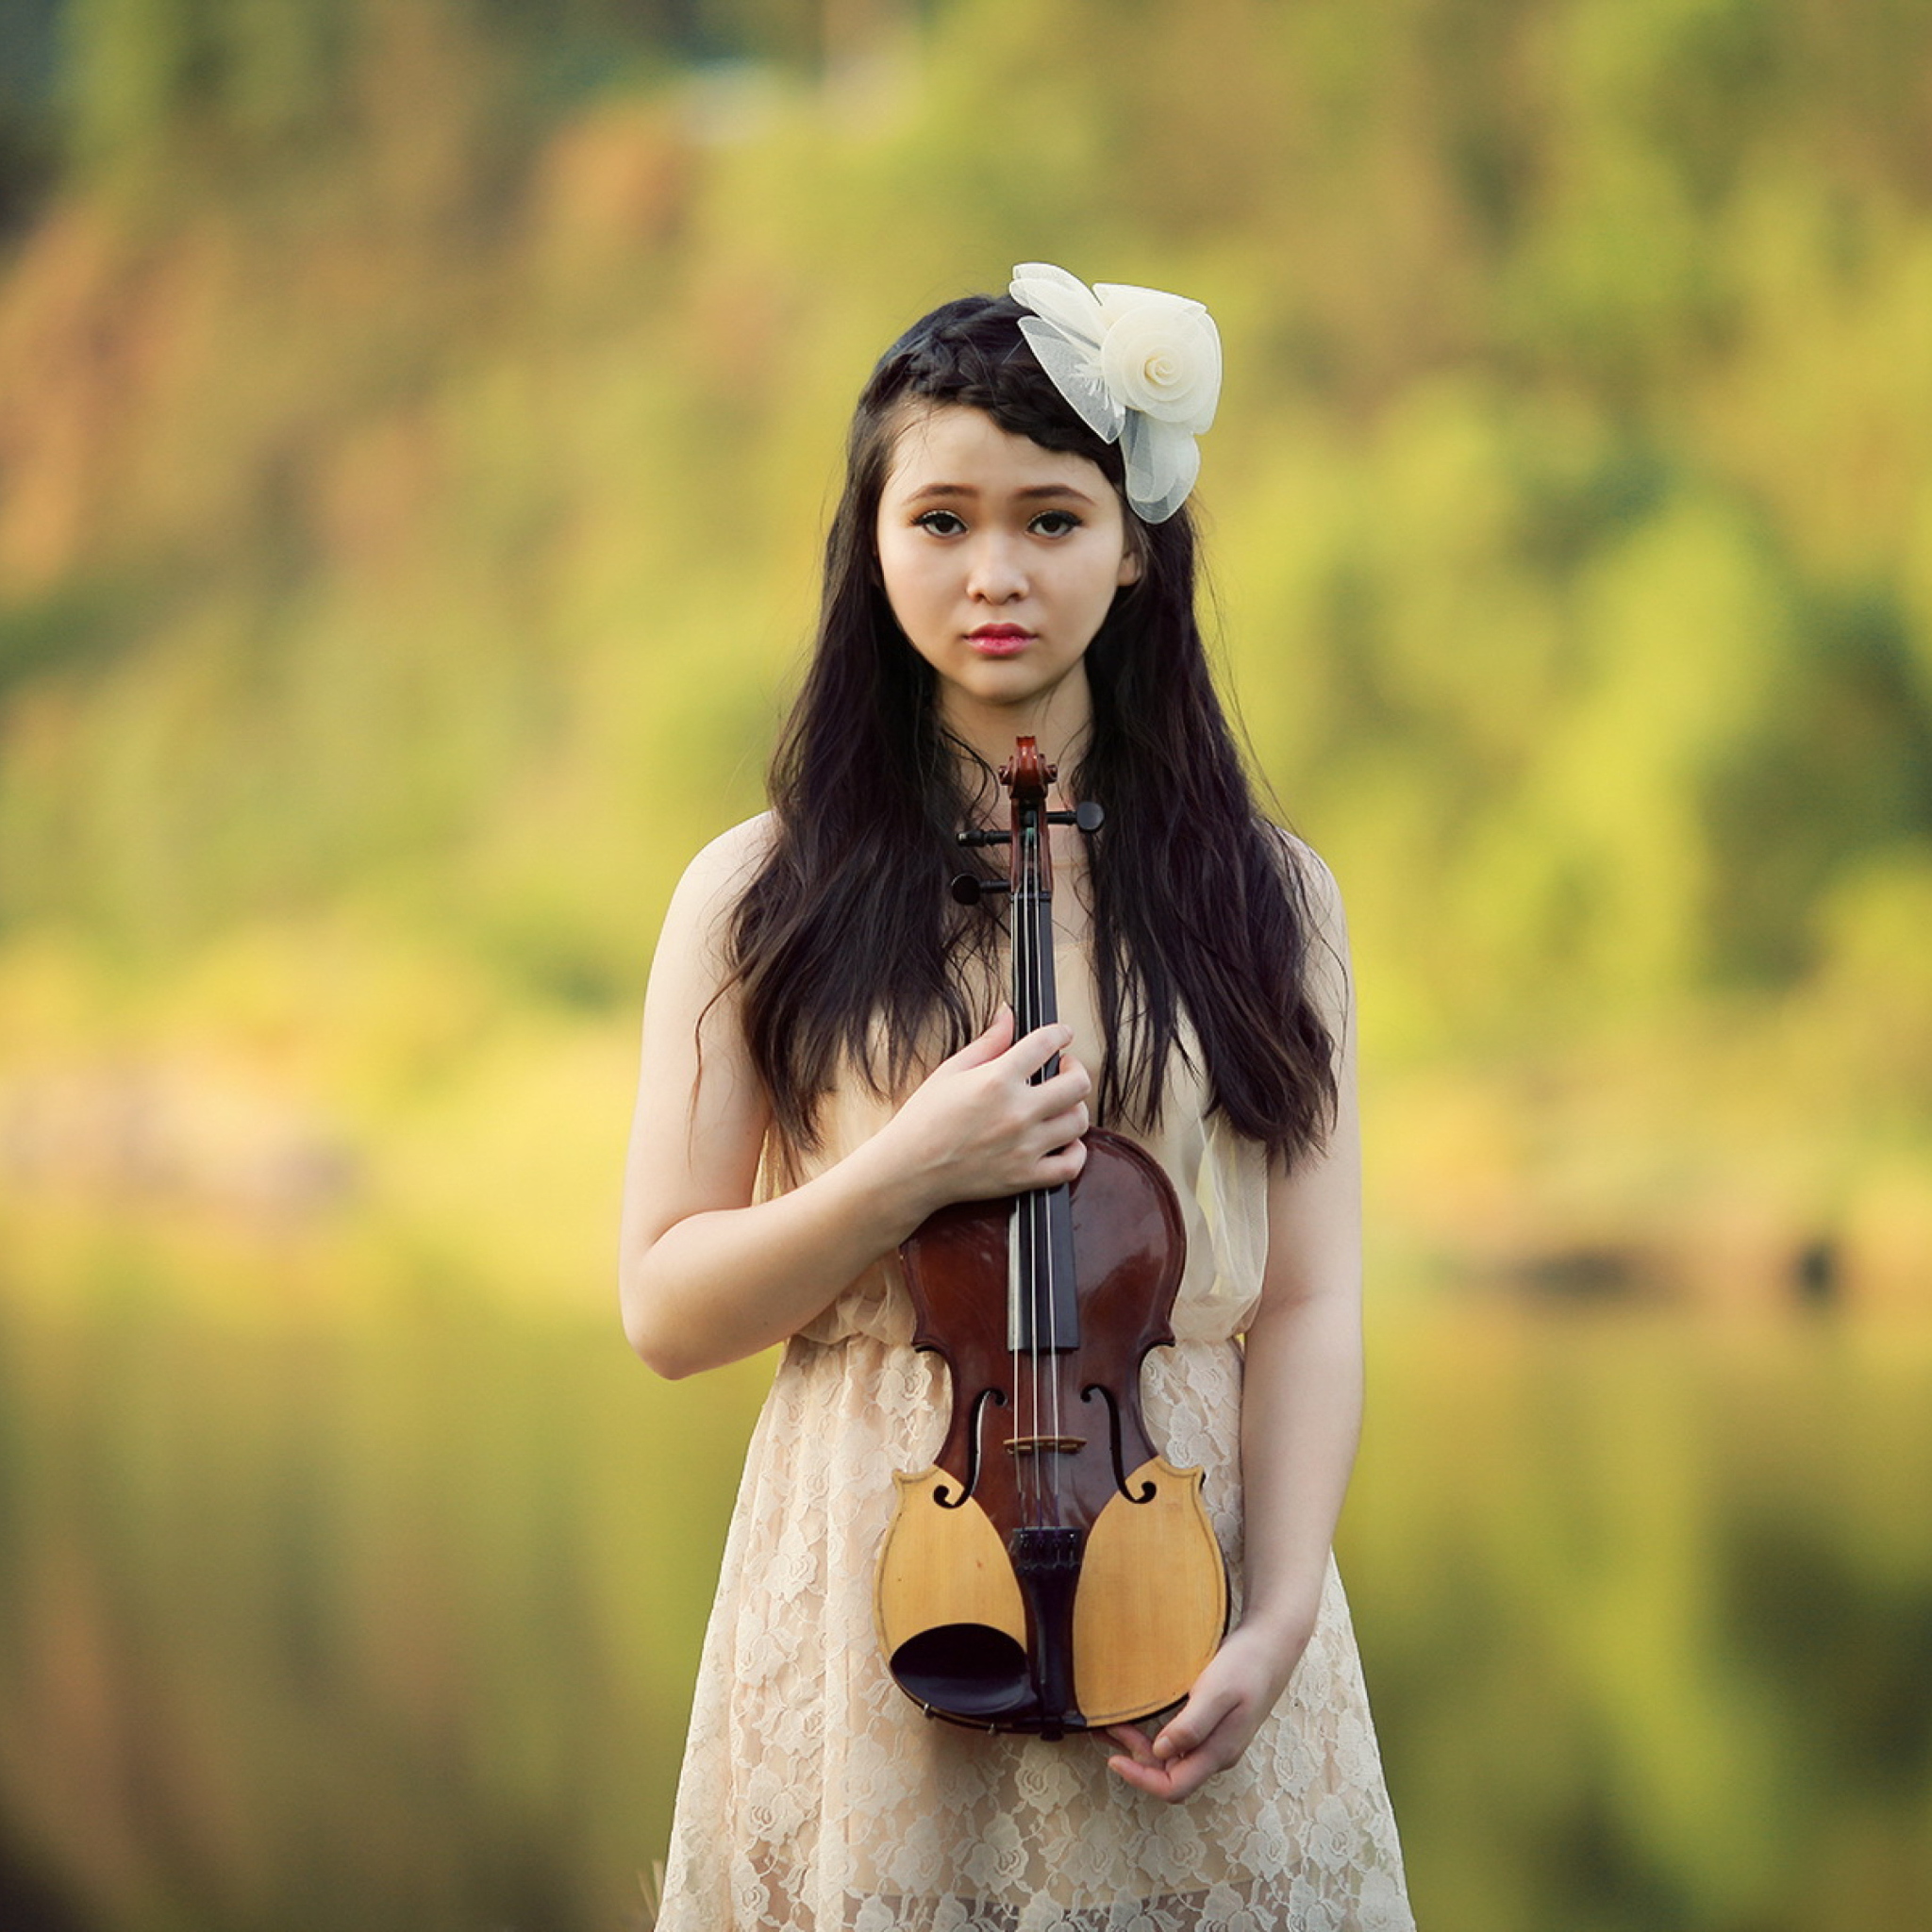 Girl With Violin wallpaper 2048x2048